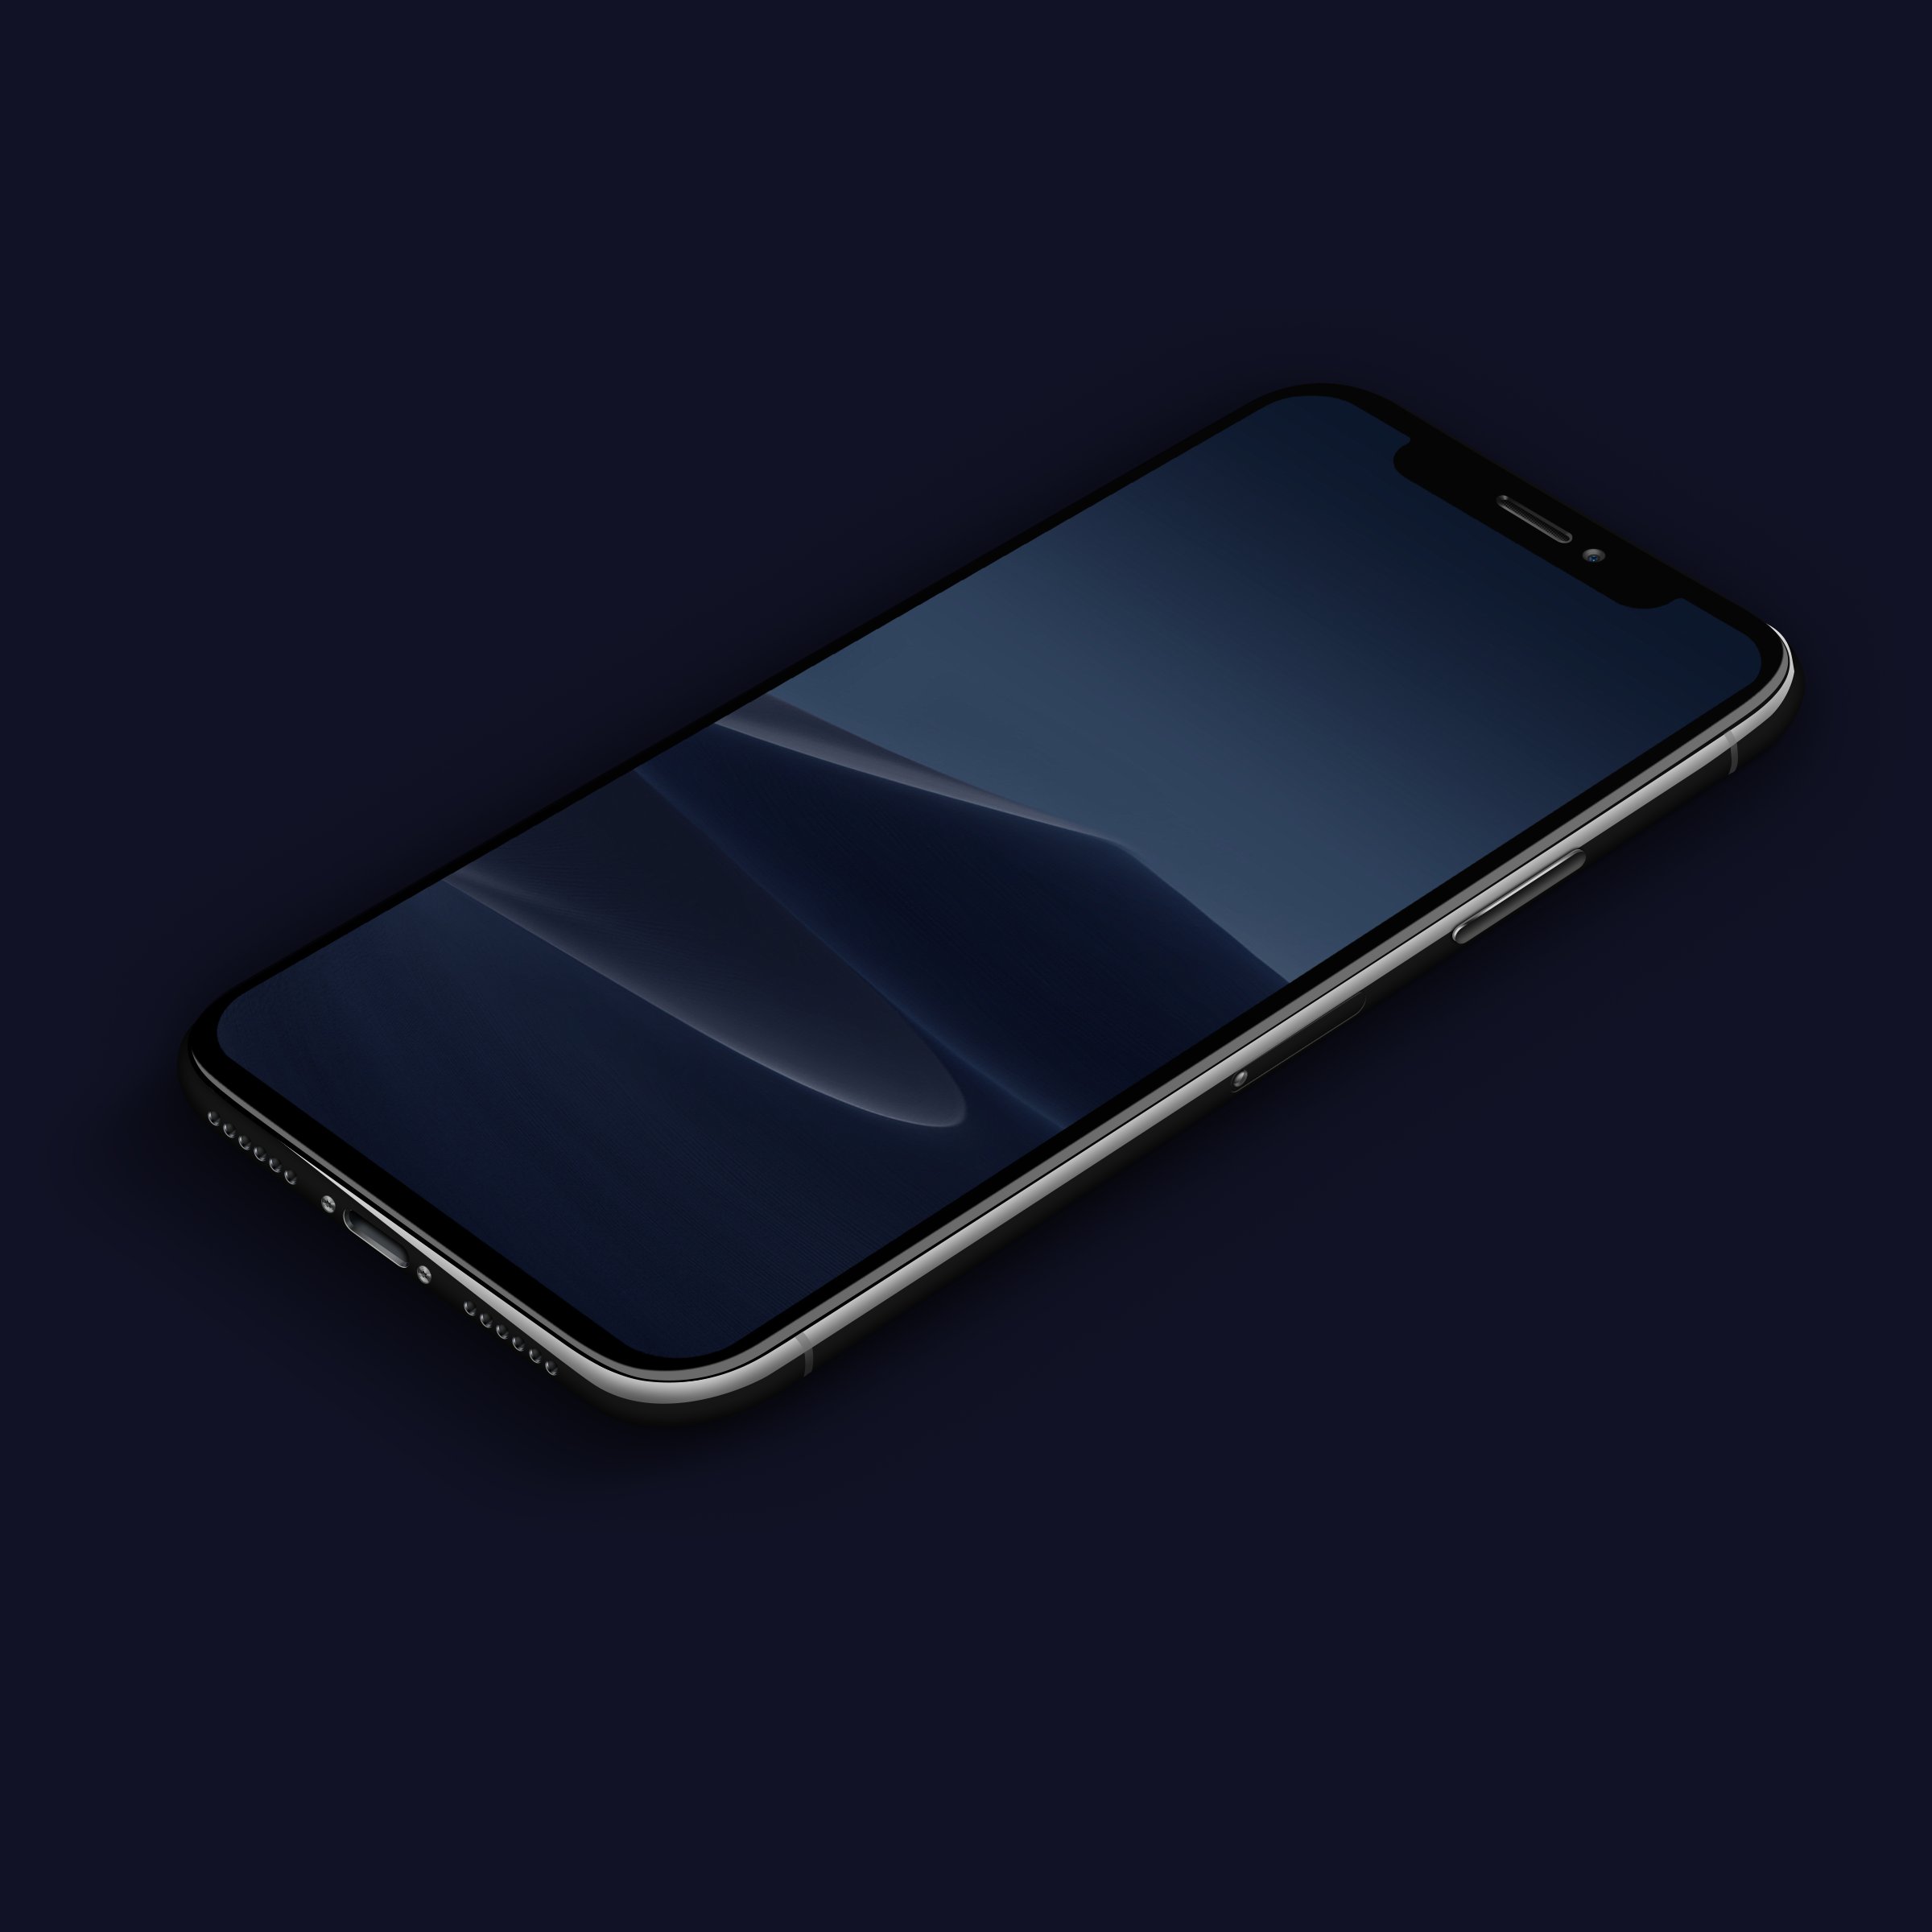 Ar7 Ar Twitter Wallpapers Ios Homescreen Macosmojave Mojave Night Minimal Wallpaper For Iphonex And All Iphone Iphone X Https T Co Kperweixbs All Iphone Https T Co 8knedhtuzn Modd By Ar72014 Https T Co Ufniilwte3 Twitter